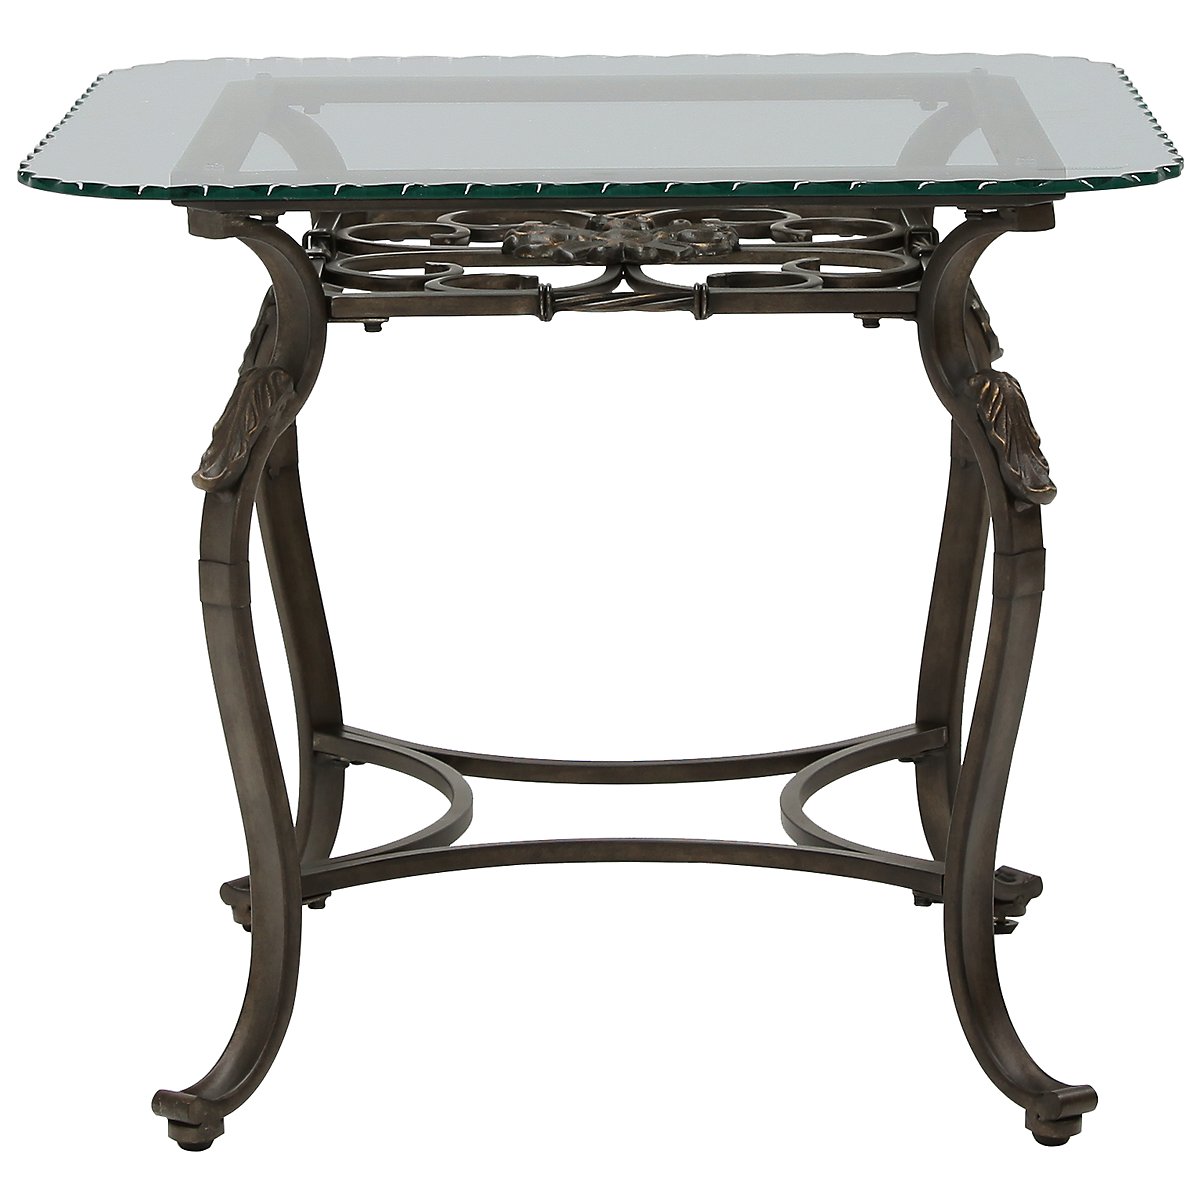 glass square end table thin accent tables mid century dining chairs round drawer farmhouse door occassional grey gloss nest dorm sets metal coffee with top legs target ott mosaic